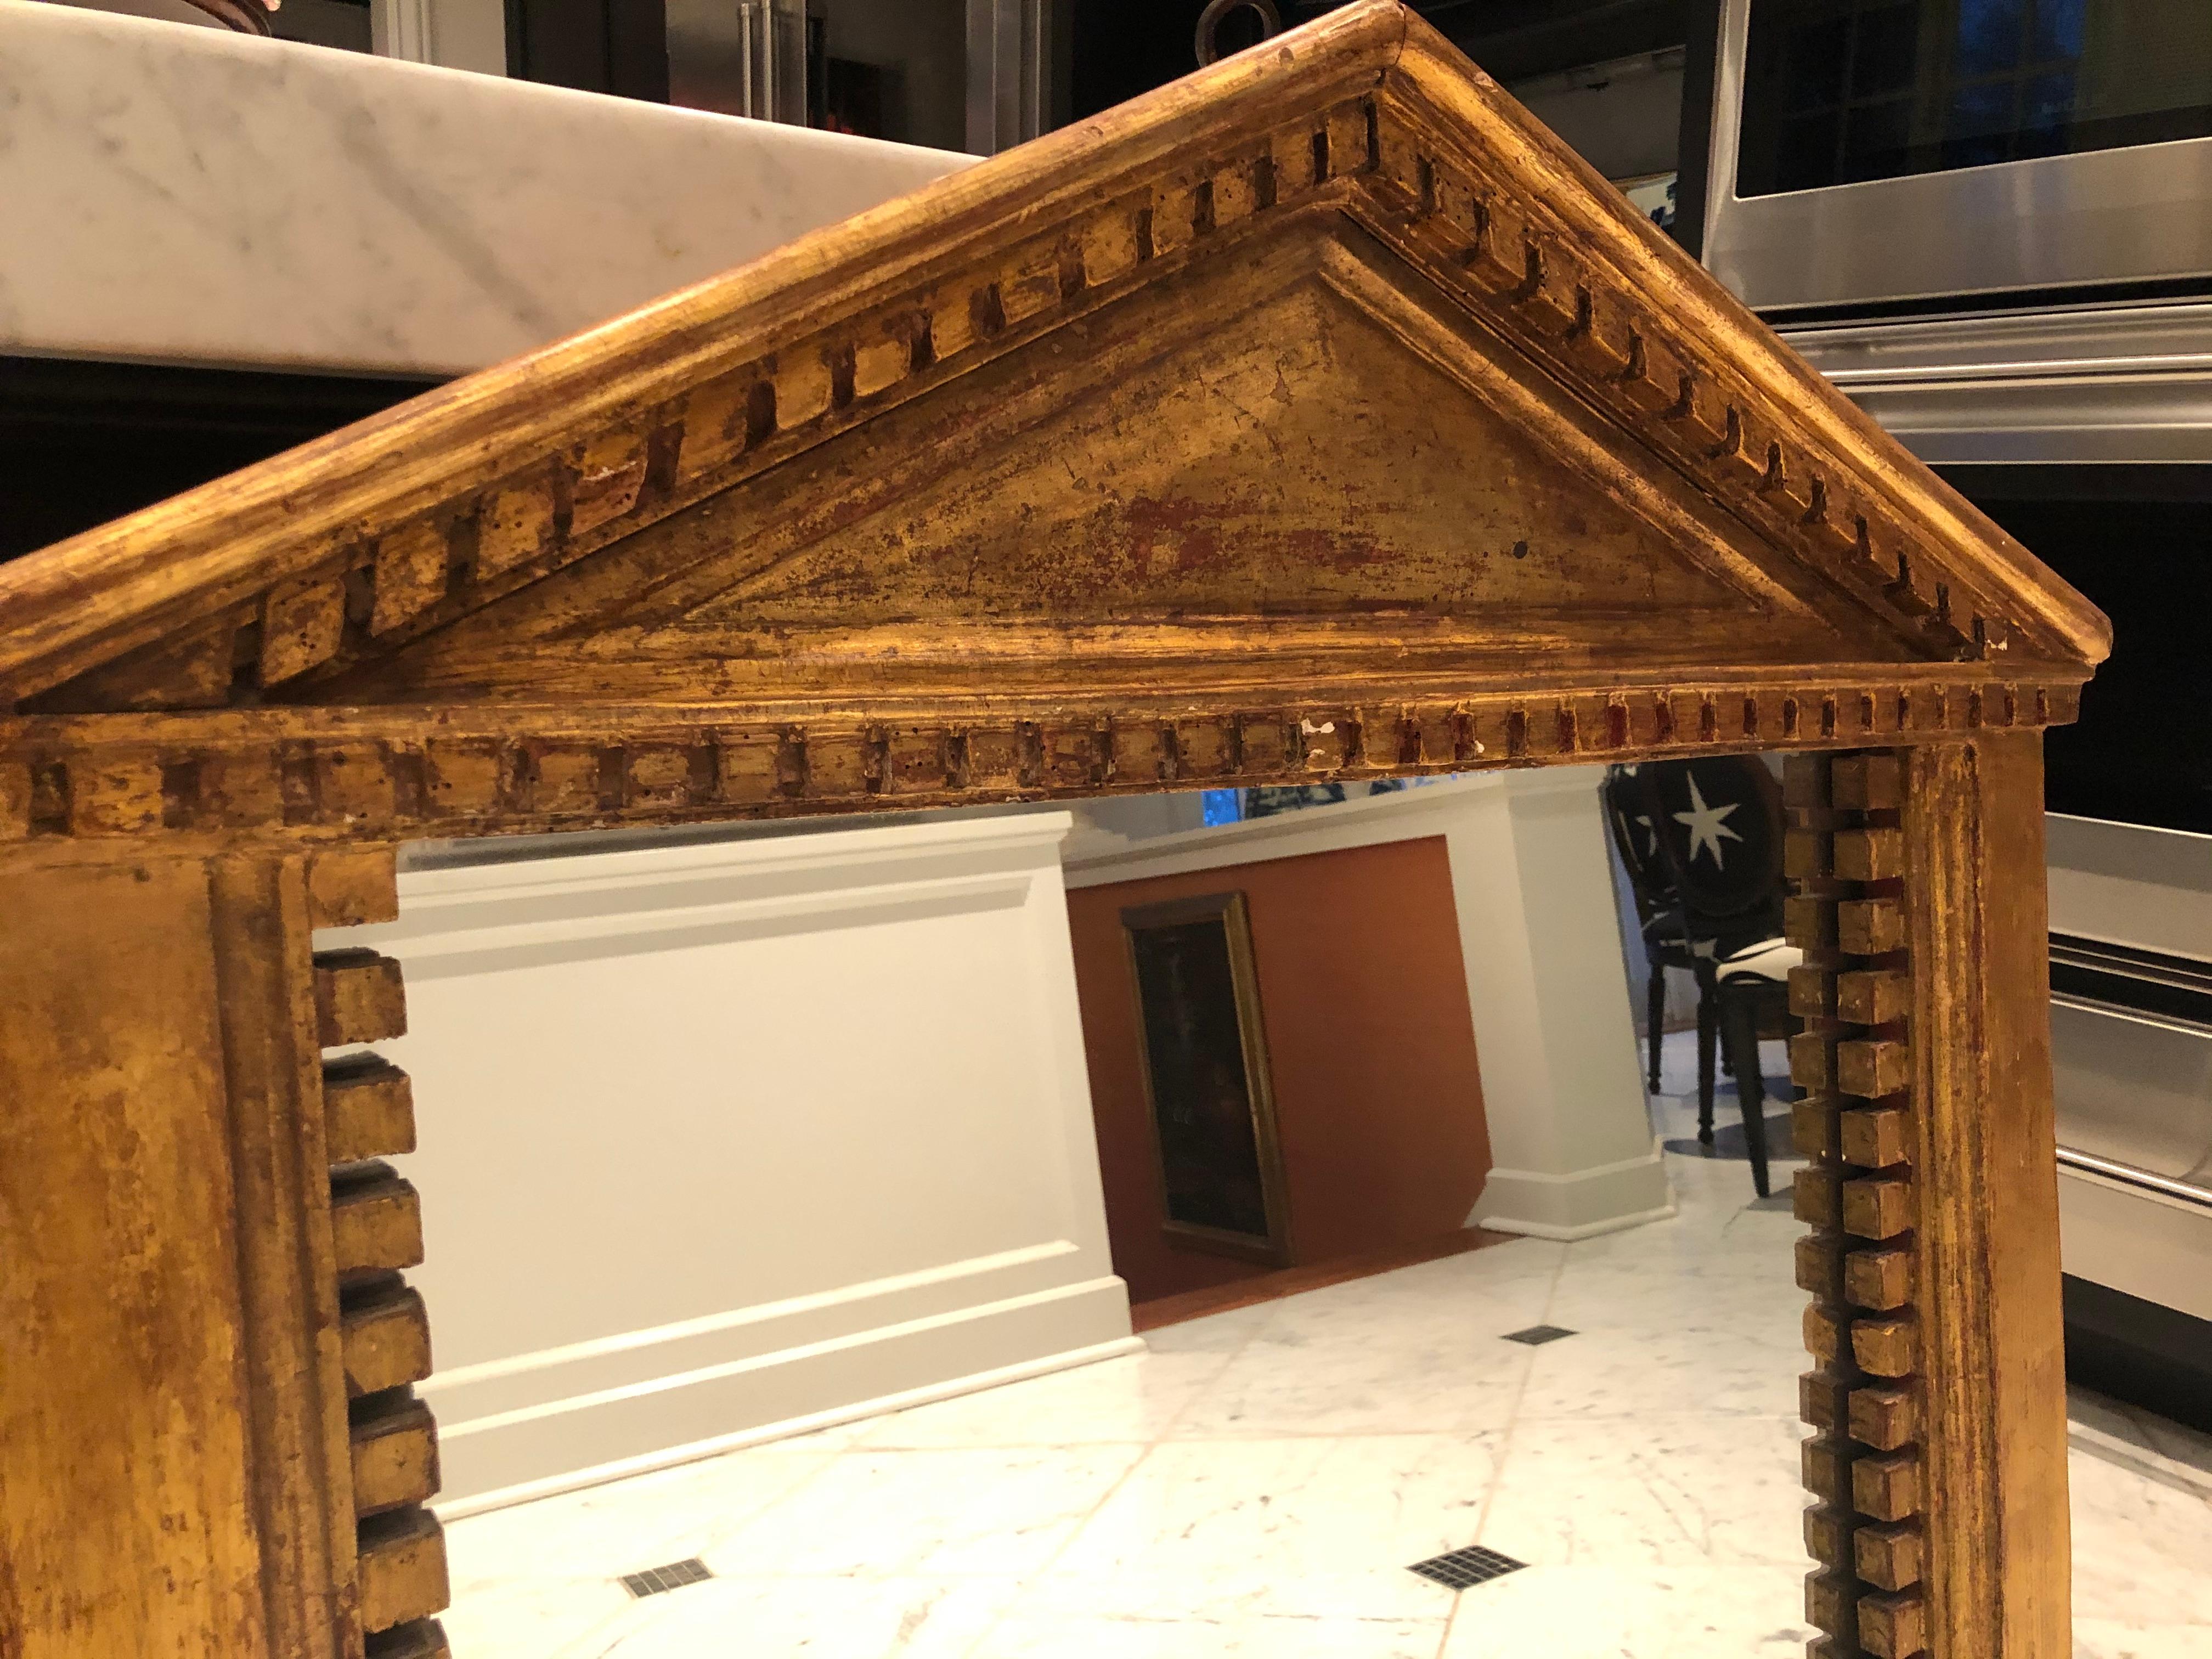 Antique pedimented mirror in the style of George III. Made of giltwood, the patina of the mirror is superb, as is the boldly carved crown molding surround.